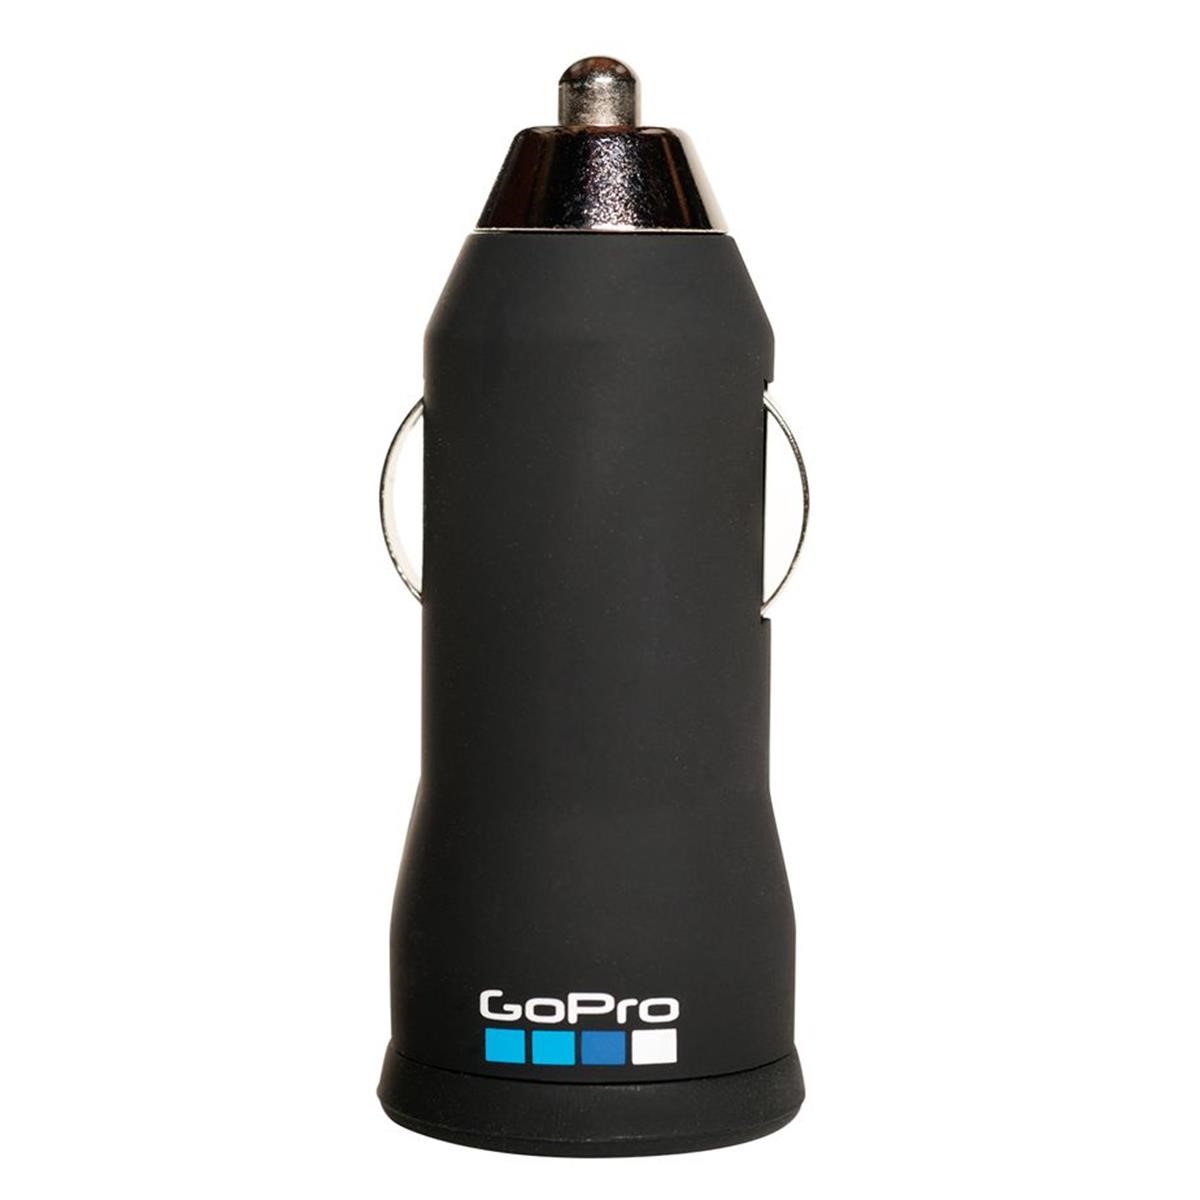 GoPro Caricabatterie per Auto Auto Charger